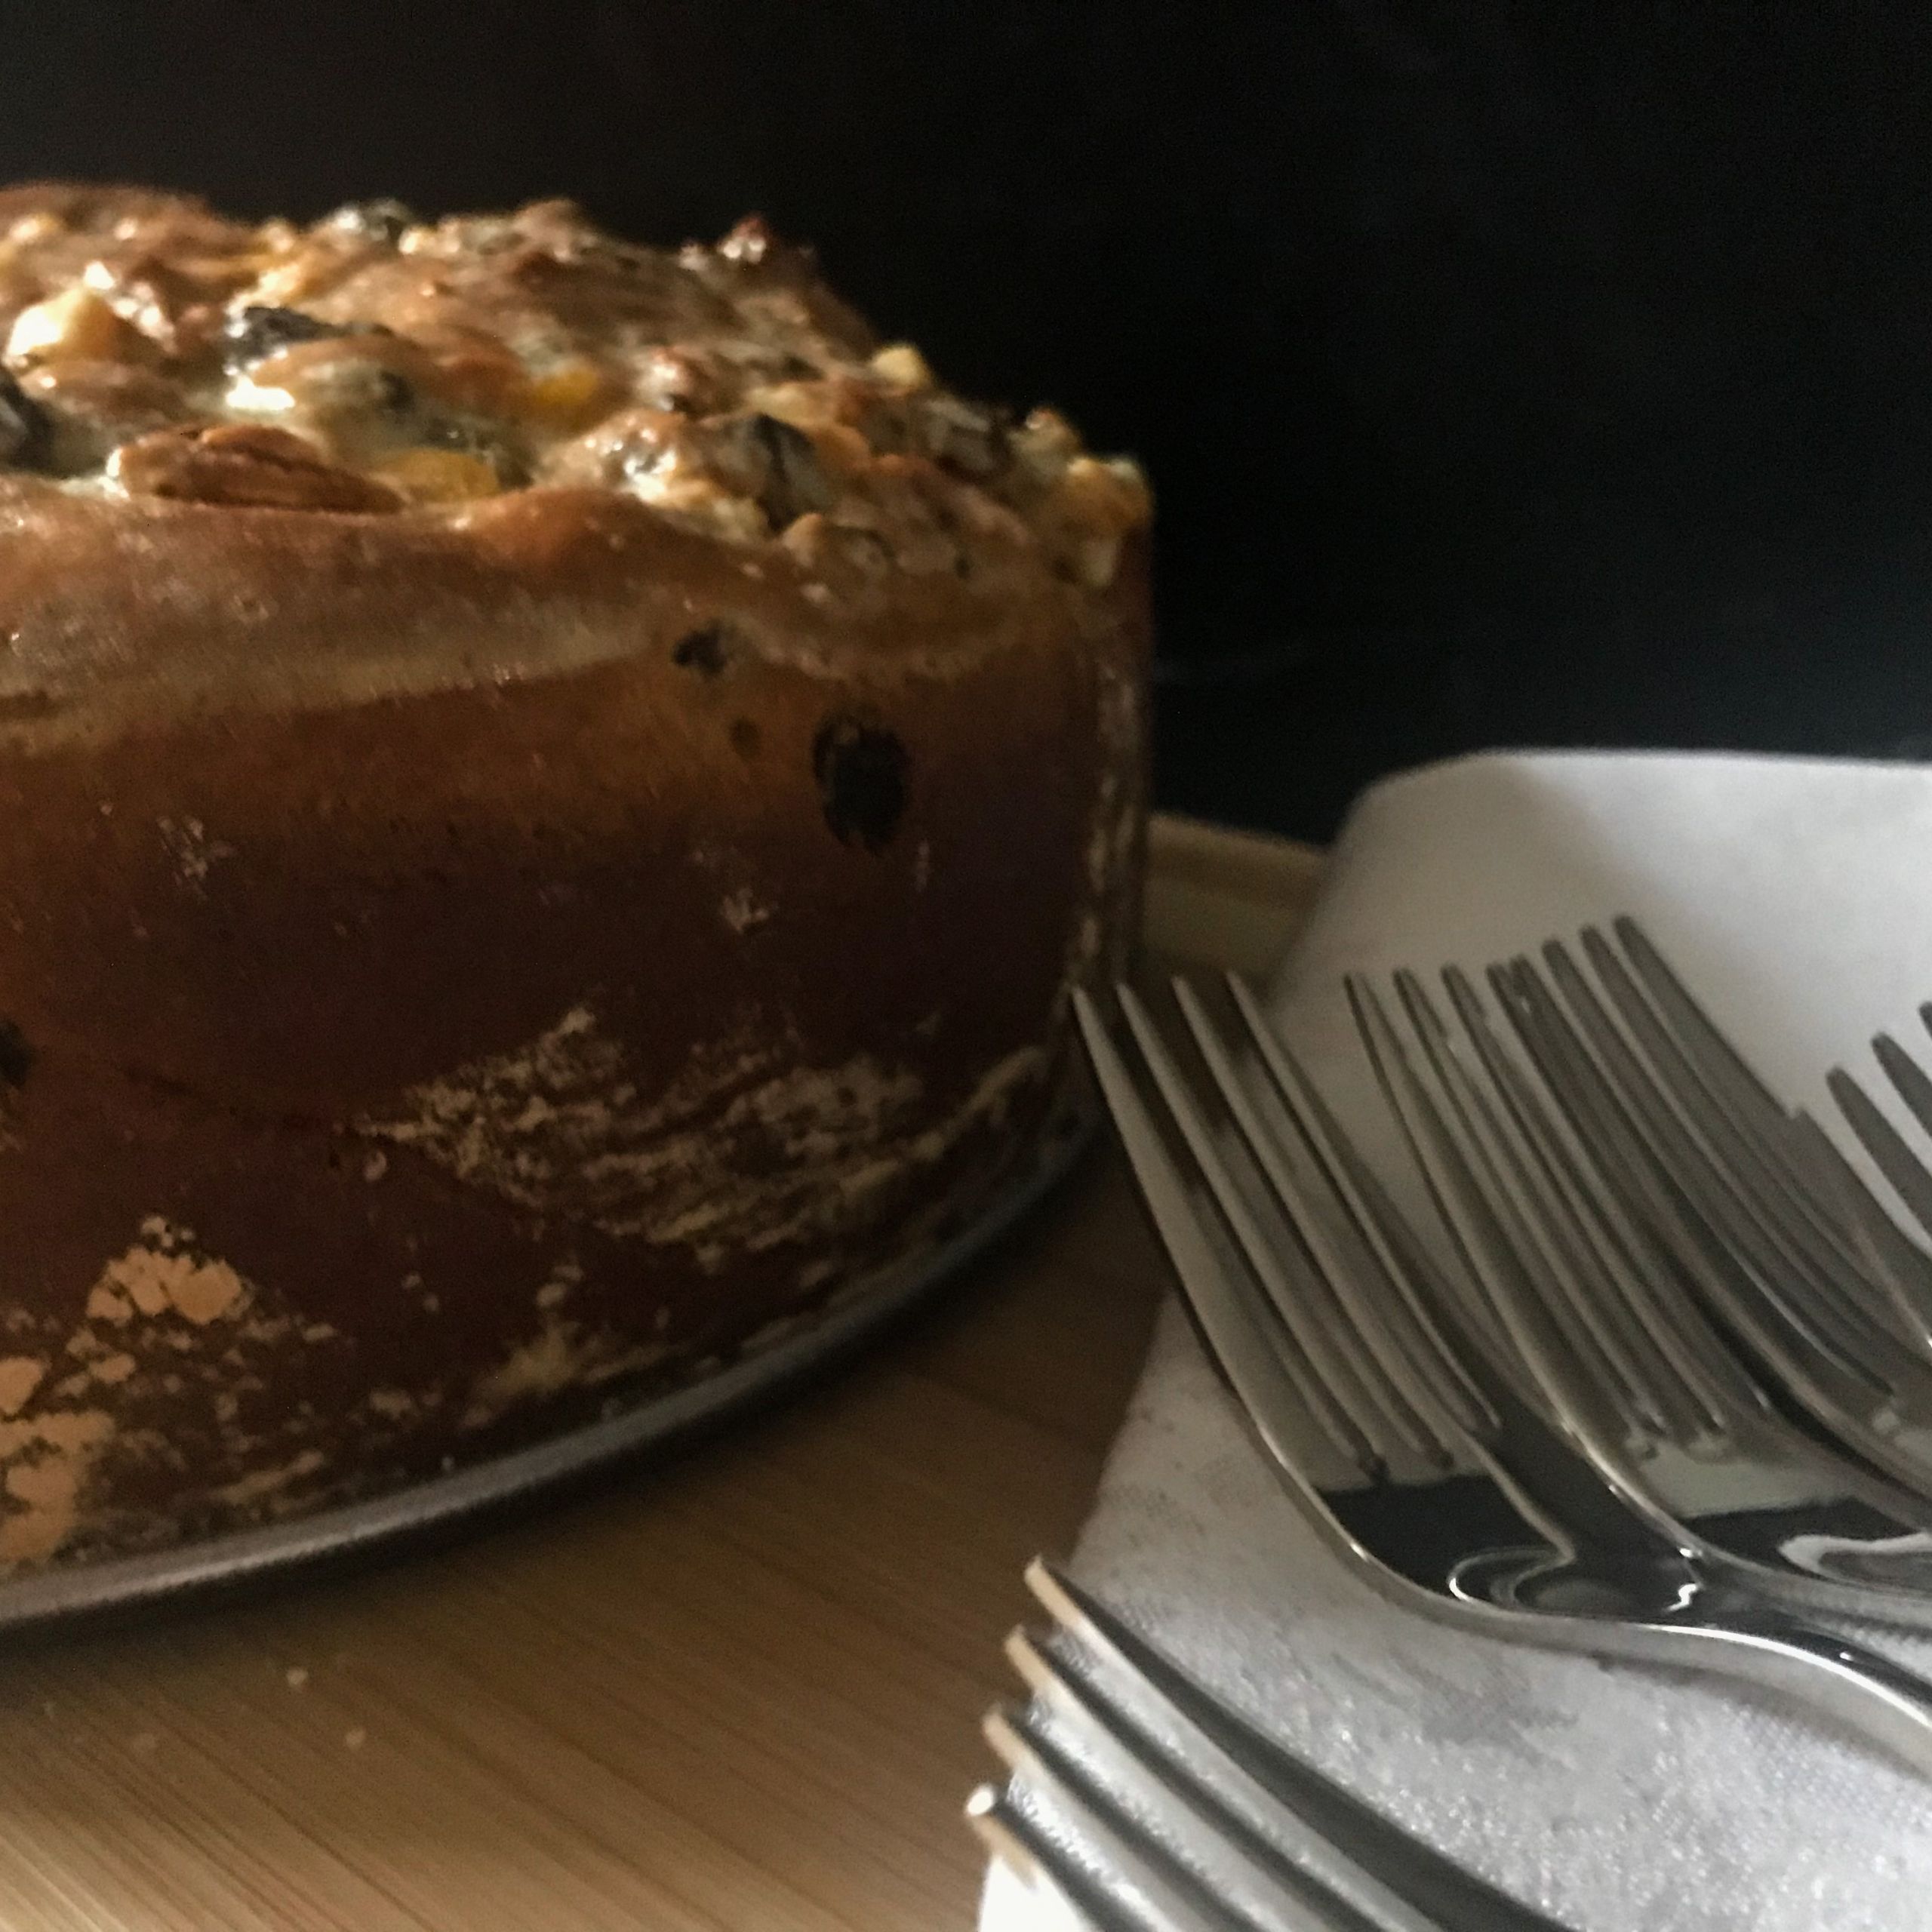 Barmbrack bread on plate with forks | my curated tastes